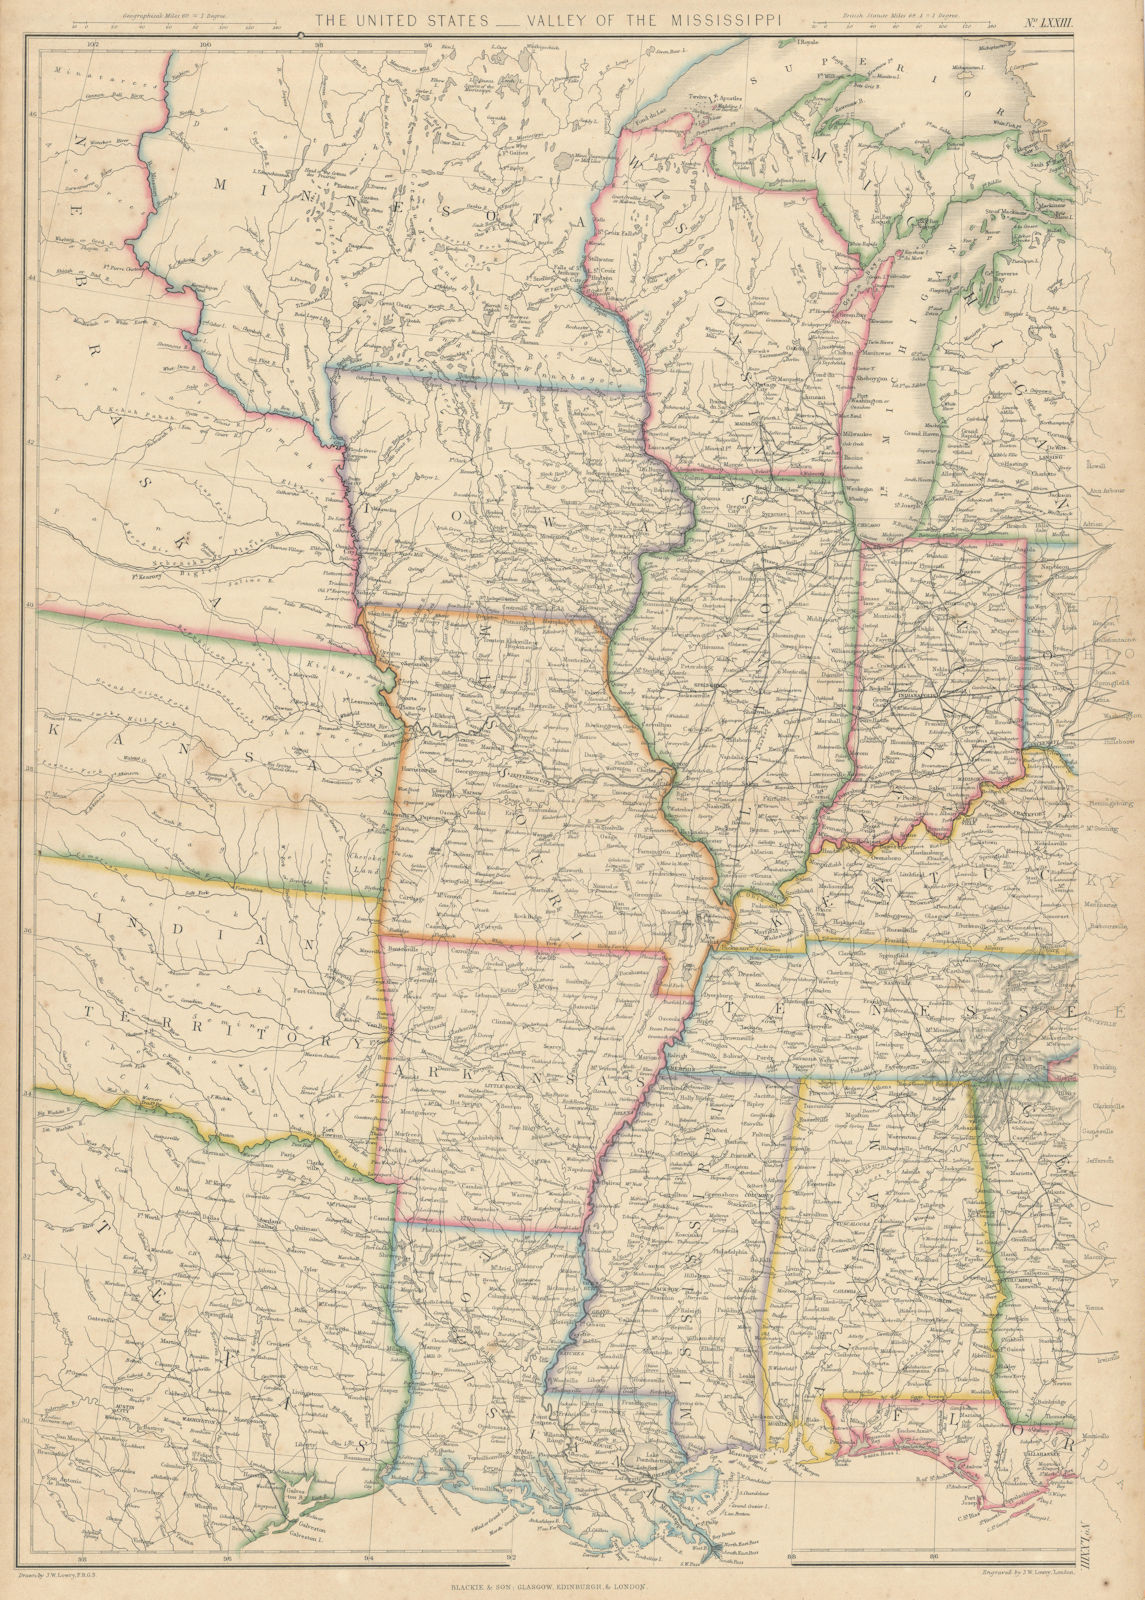 United States - Valley of the Mississippi by Joseph Wilson Lowry. USA 1860 map